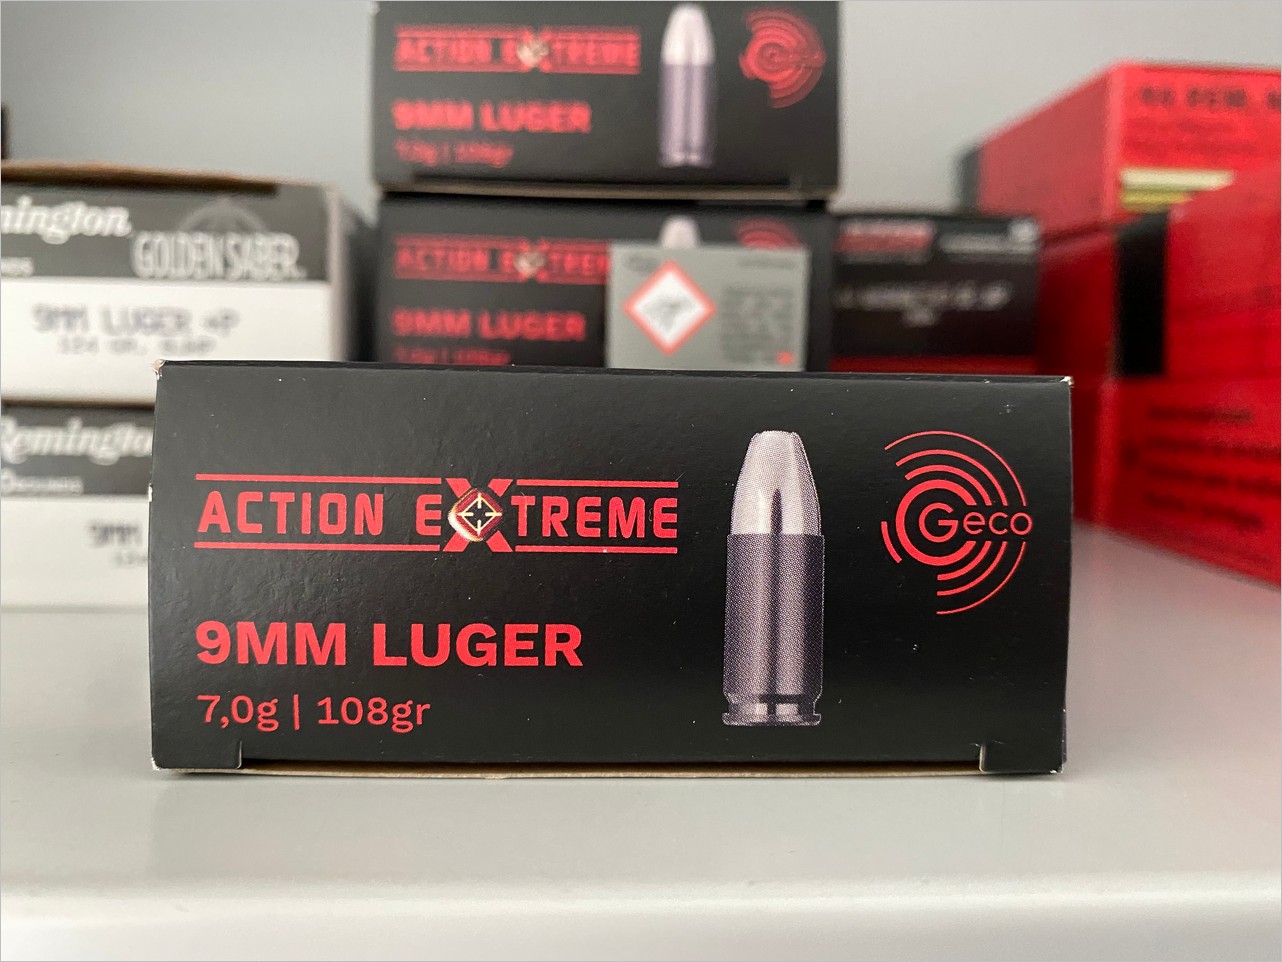 GECO Action Extreme 9MM LUGER 108GR